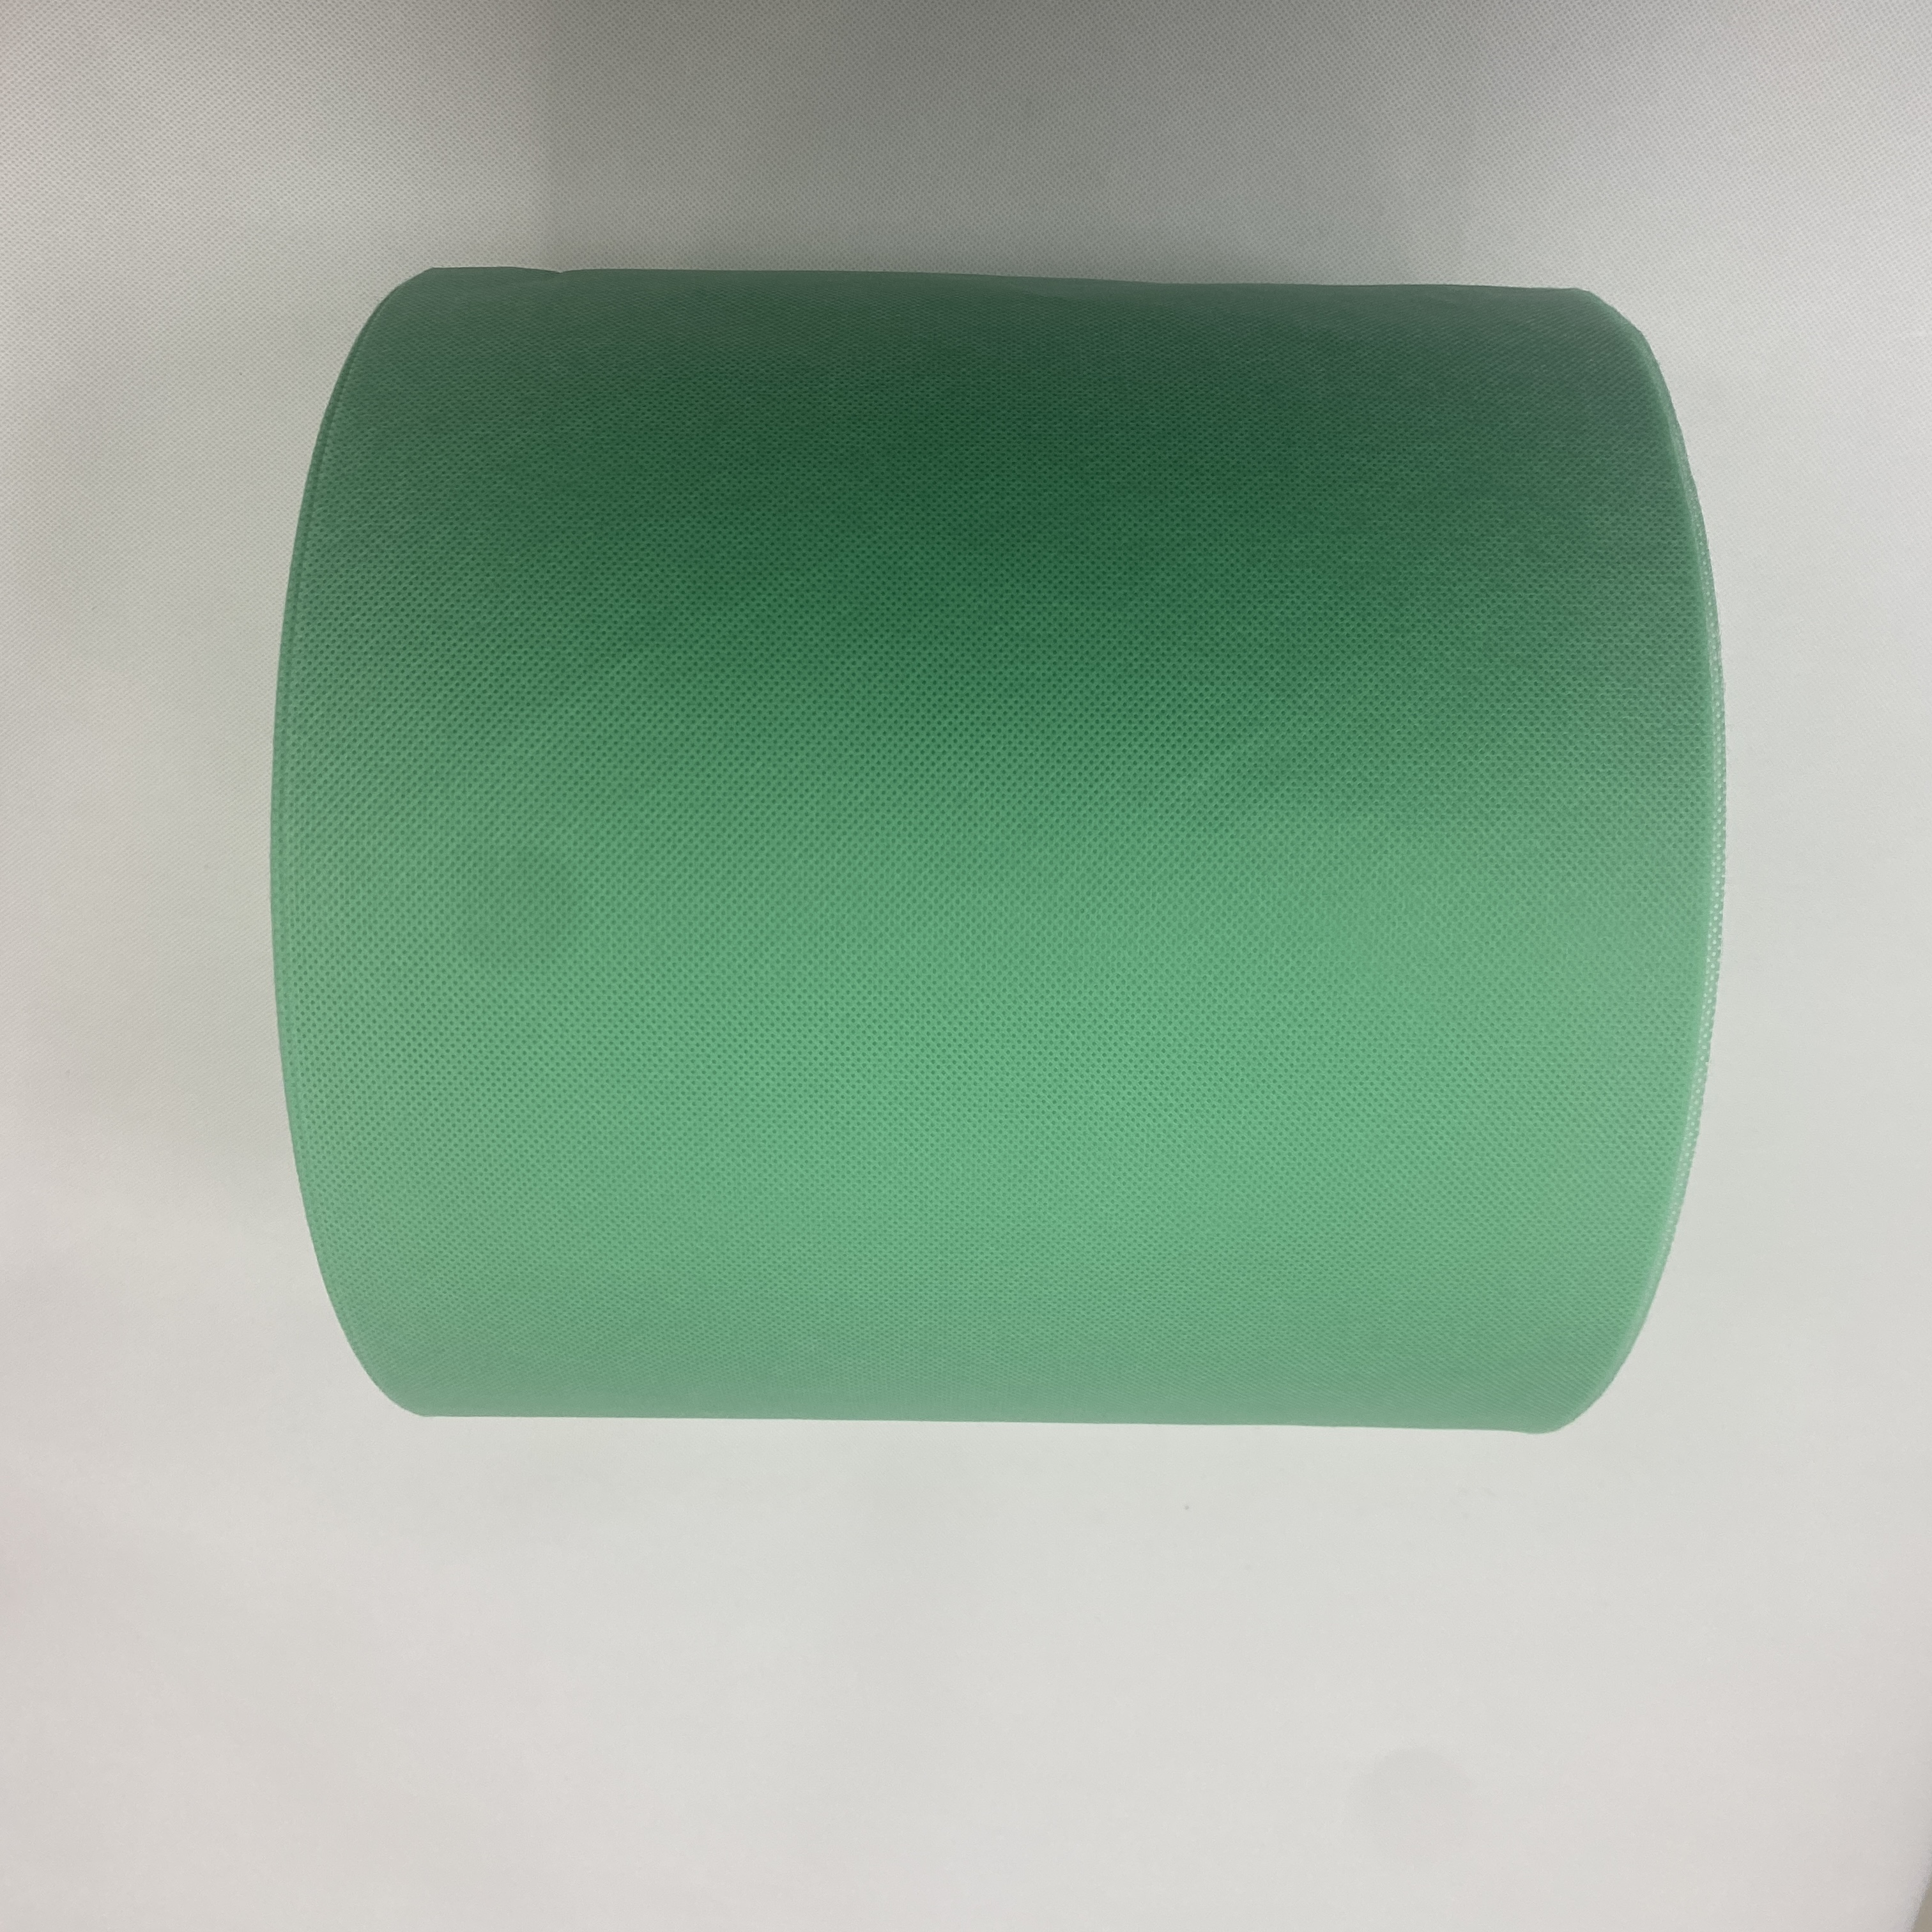 100%PP Non Woven Fabric Roll Colorful Spunbonded Nonwoven Fabric Cloth for Medical Product 3ply